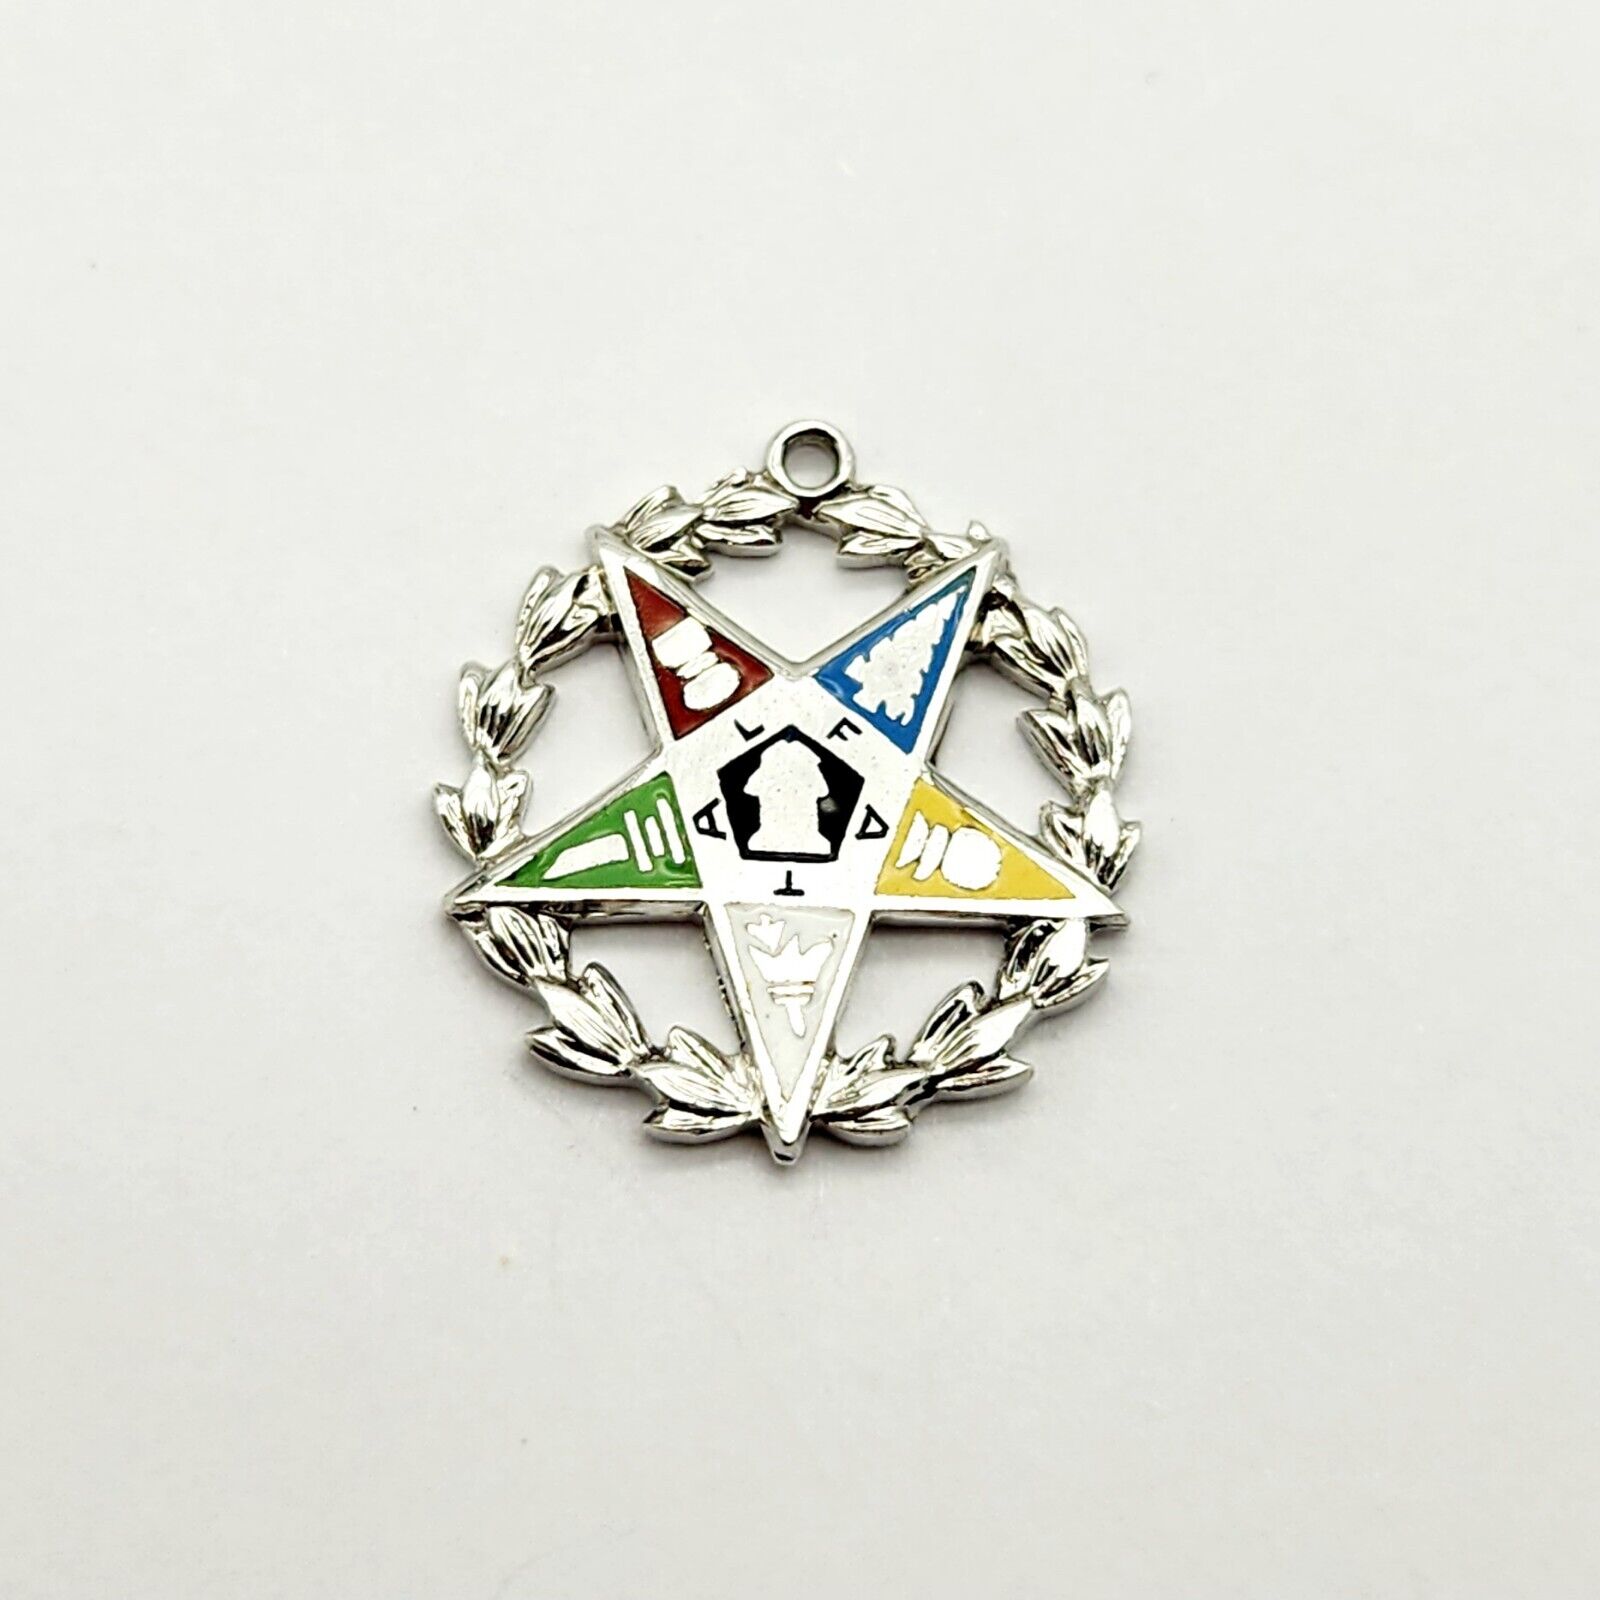 Vintage Order Of The Eastern Star Sterling Silver Masonic Orthodox Charm Pendant